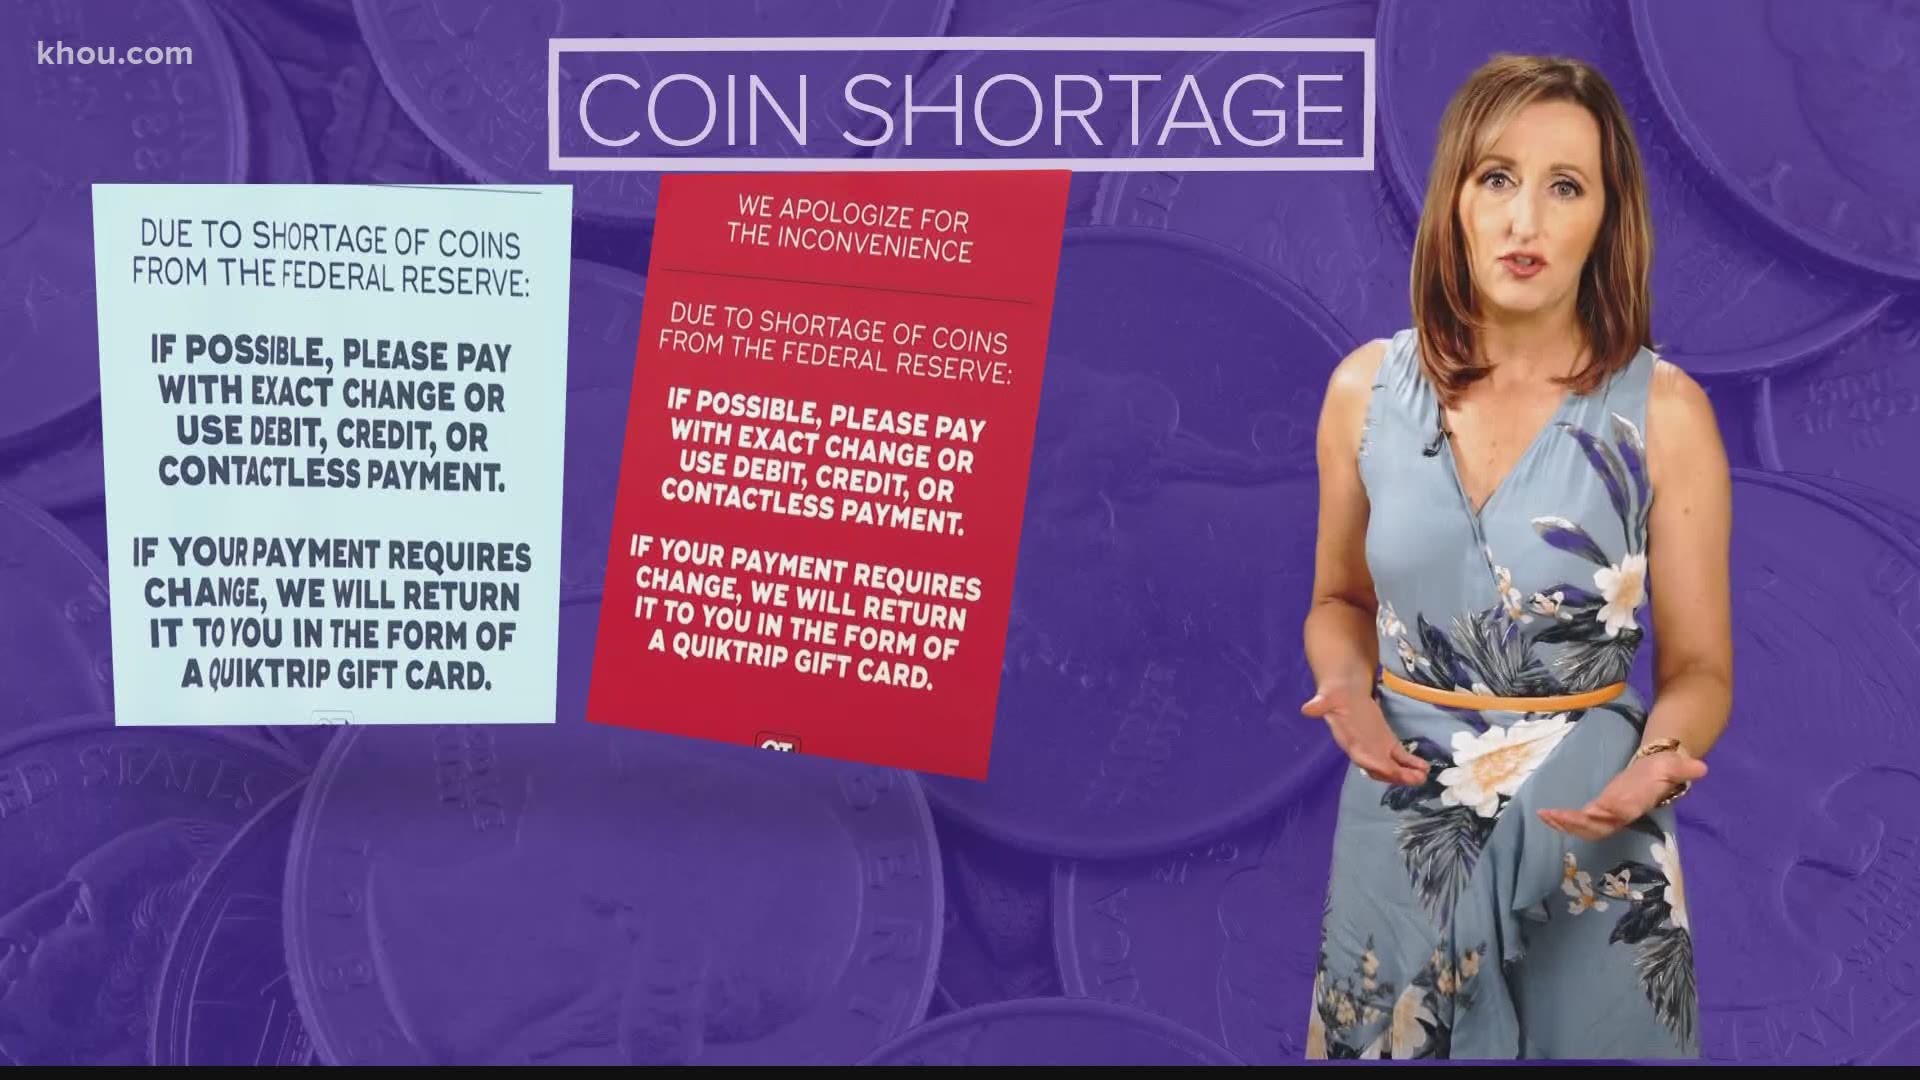 Here’s what some stores are doing to deal with the national coin shortage.